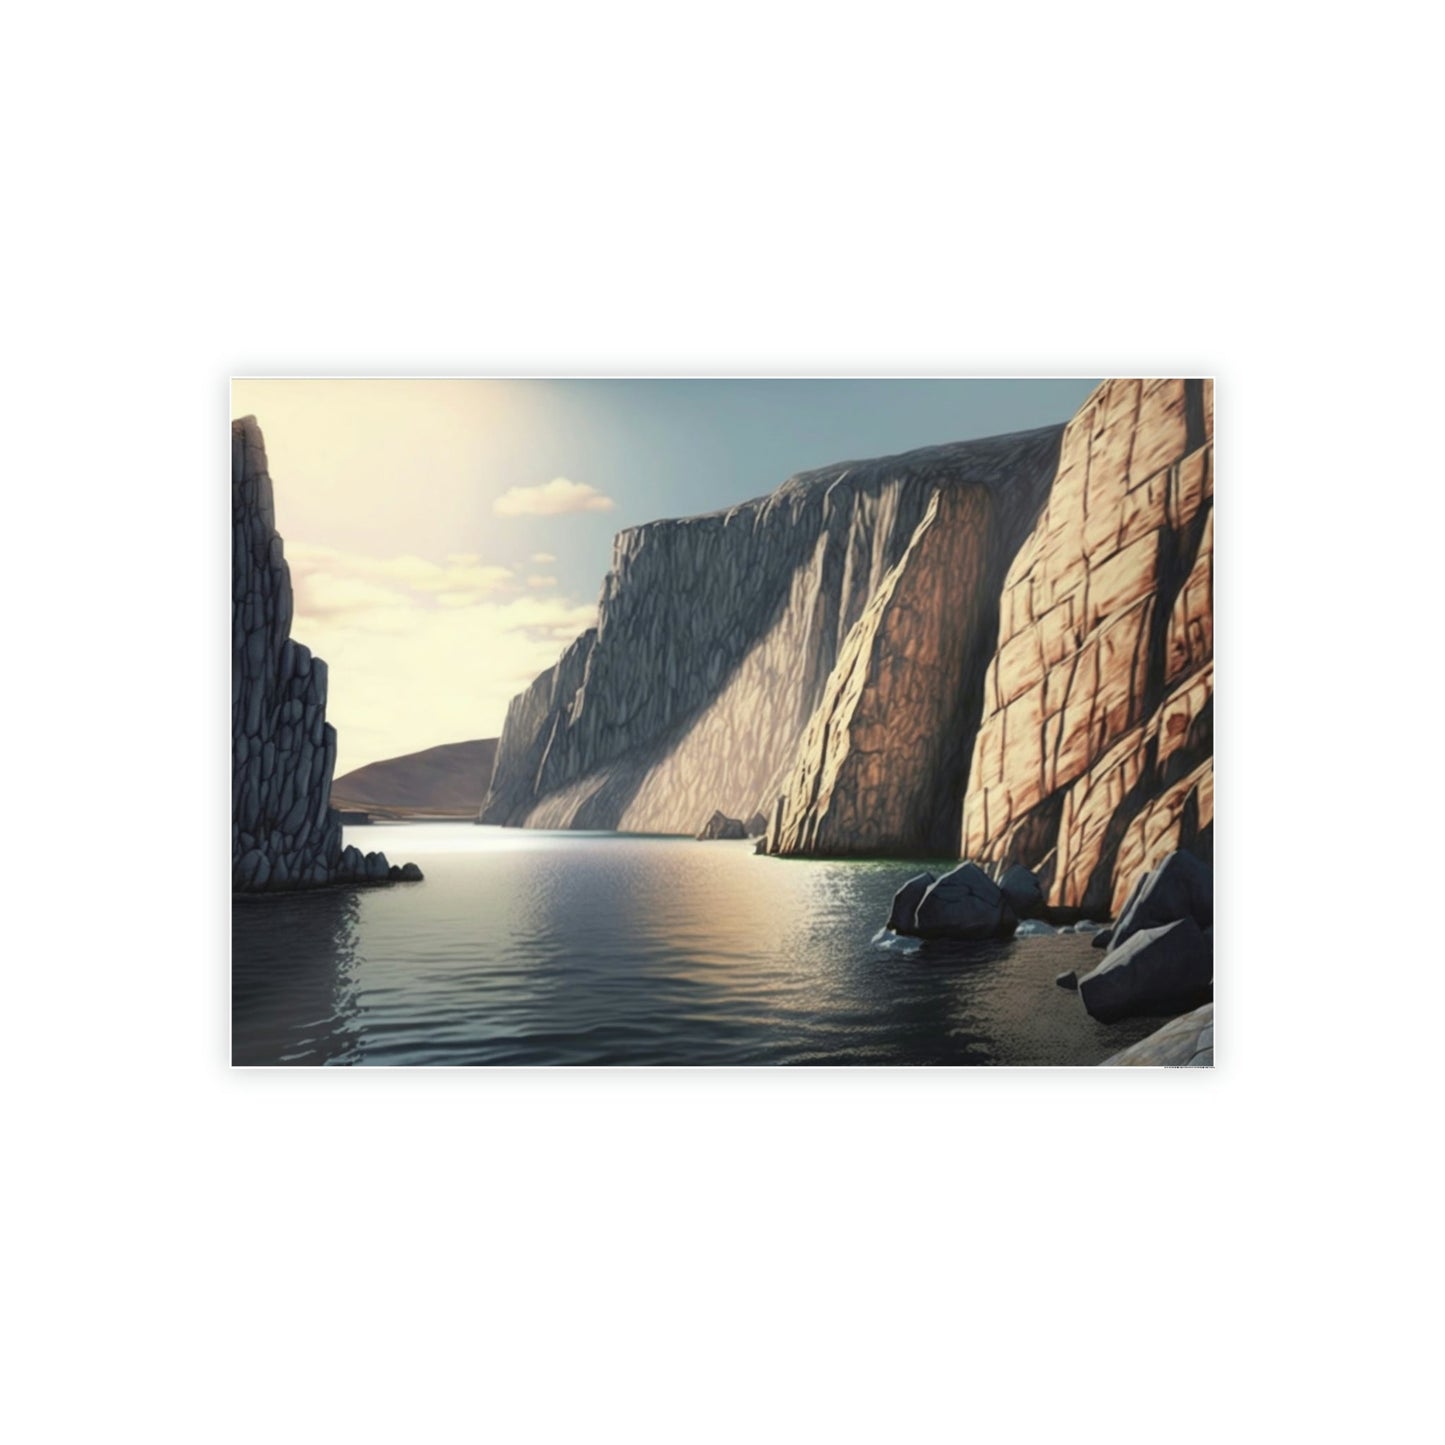 Majestic Cliffs: Natural Canvas Wall Art with Scenic Beauty